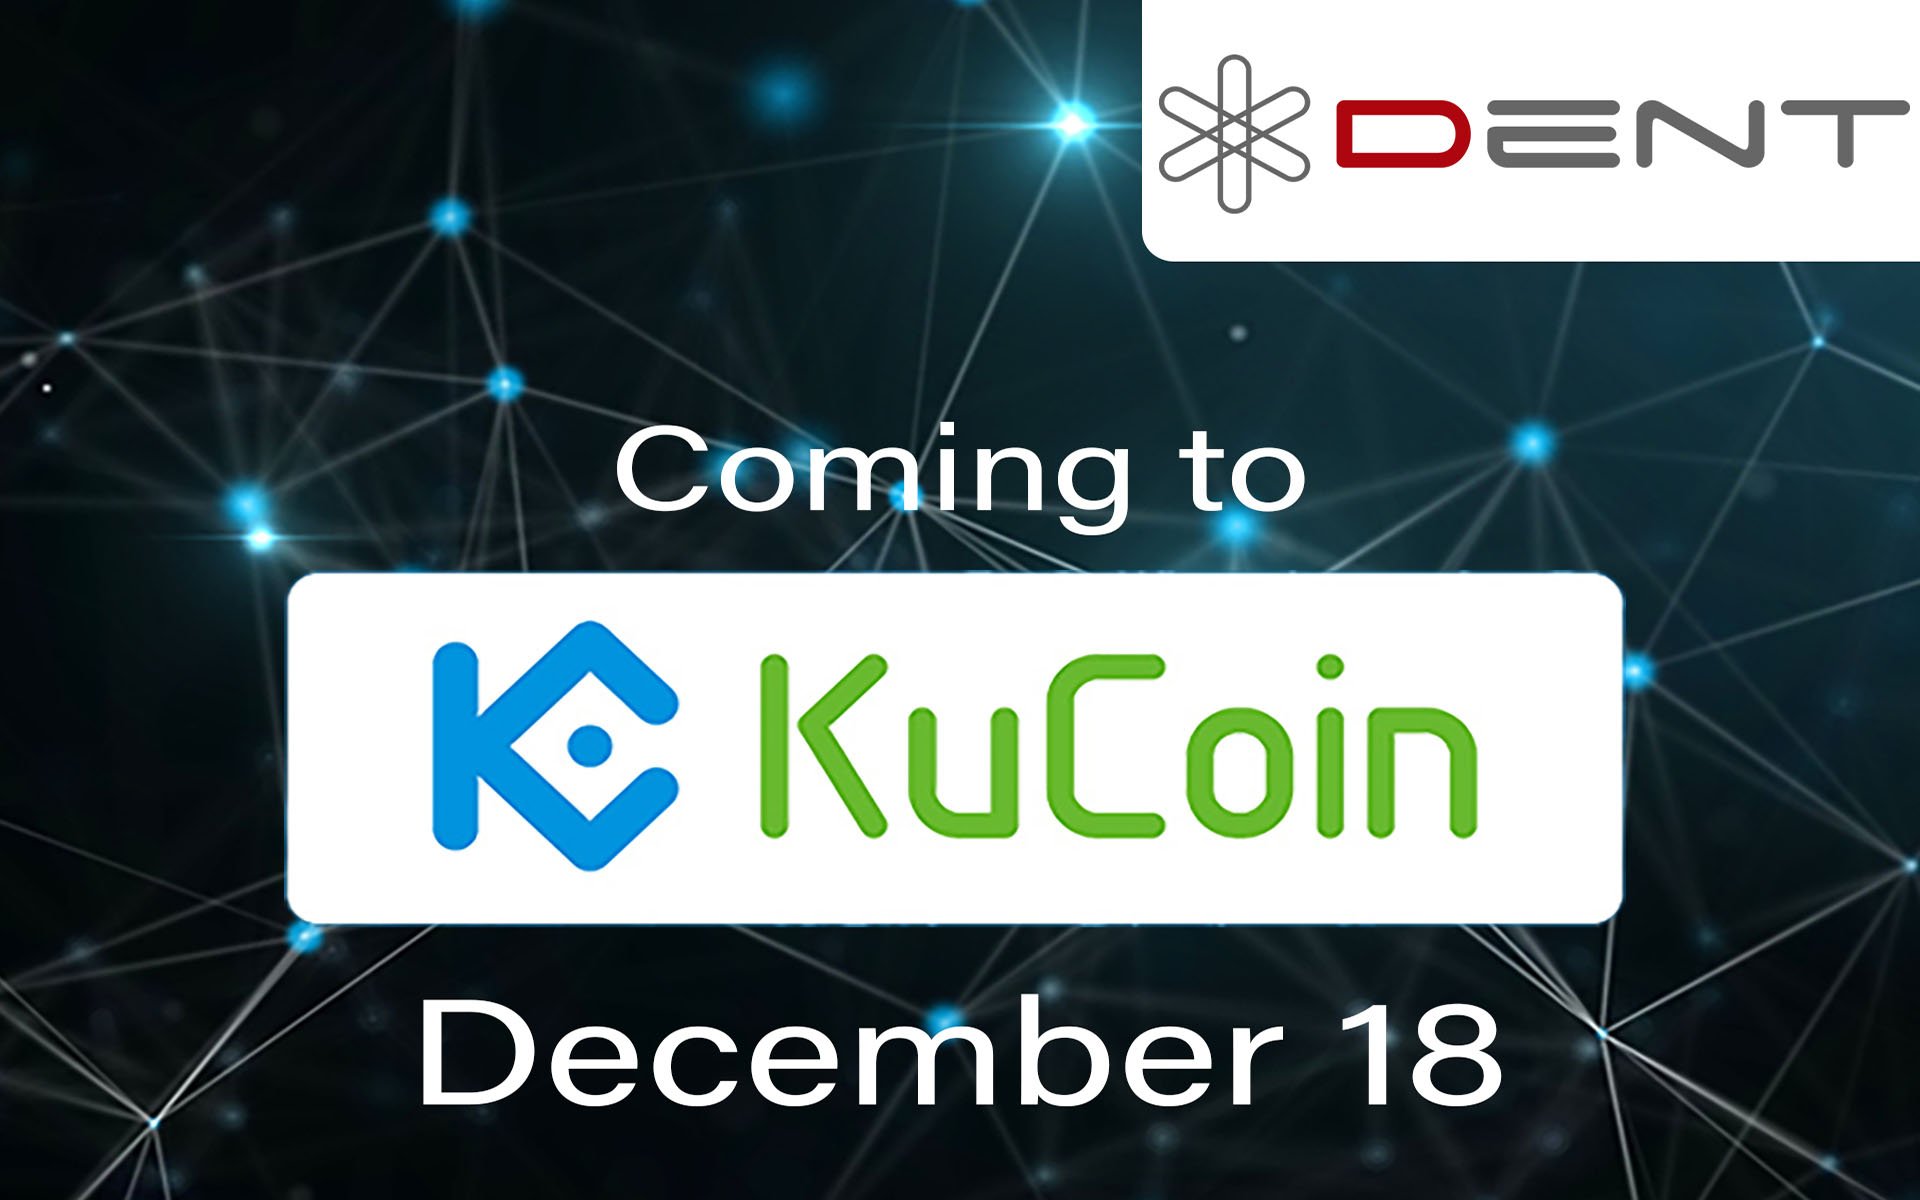 DENT Will Be Listed On KuCoin: Trading Starts On December 18 With 10 Million DENT As Prize For Top Traders